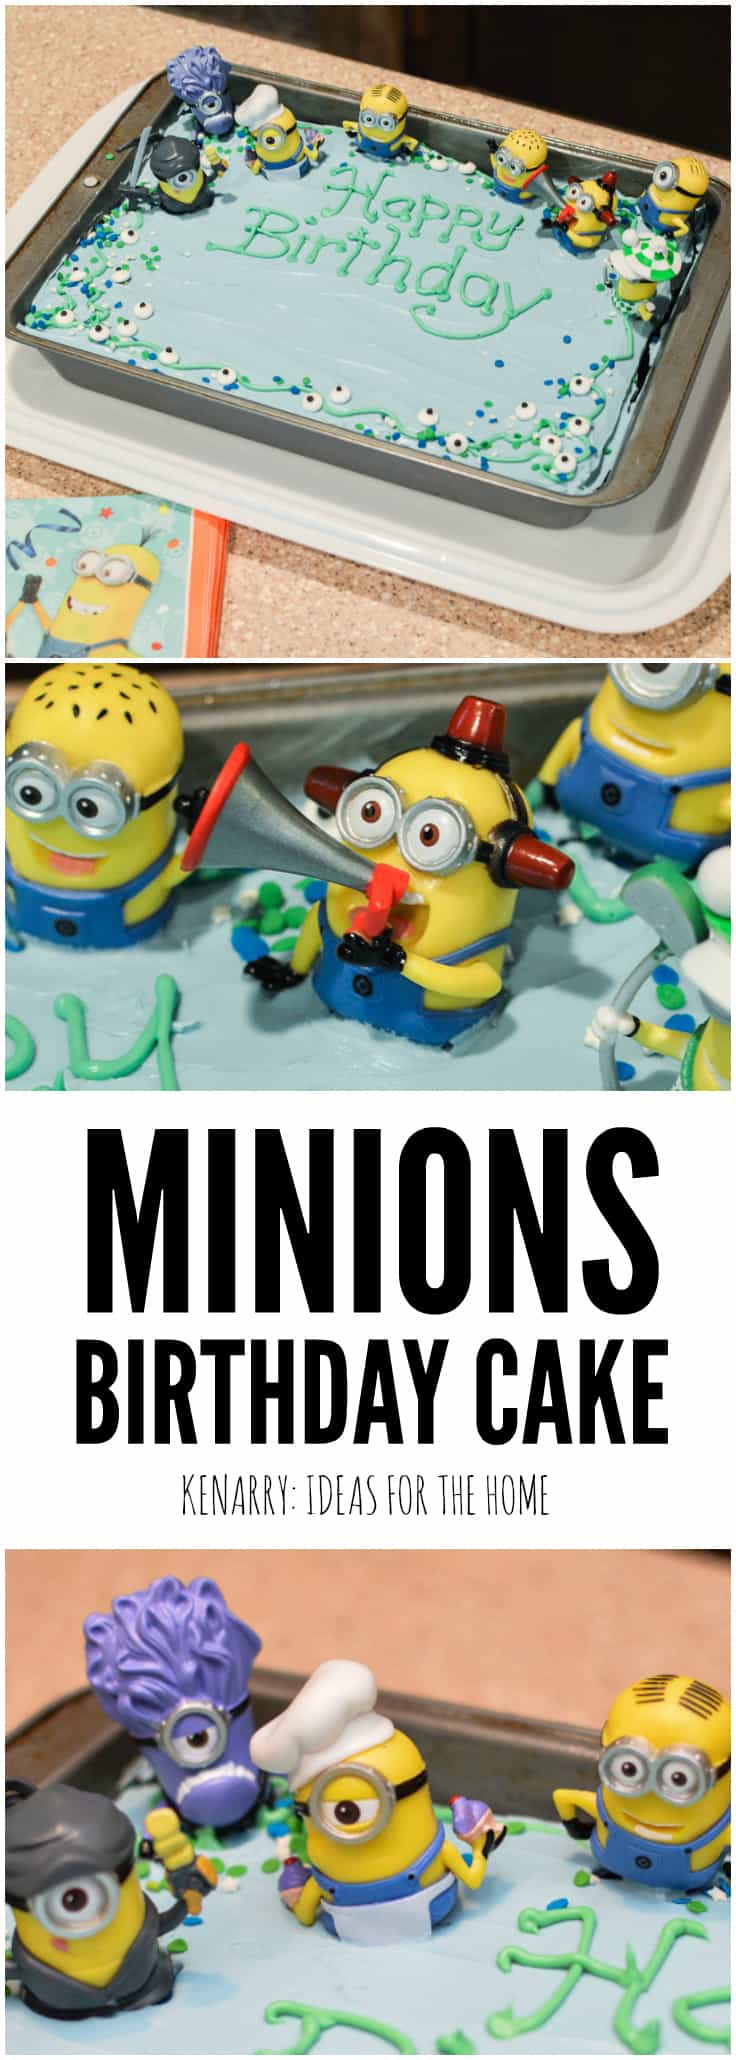 Does your child love the hilarious Minions from the Despicable Me movies? Learn how to make a super easy Minions Birthday Cake for a kid's party with this cake decorating tutorial.